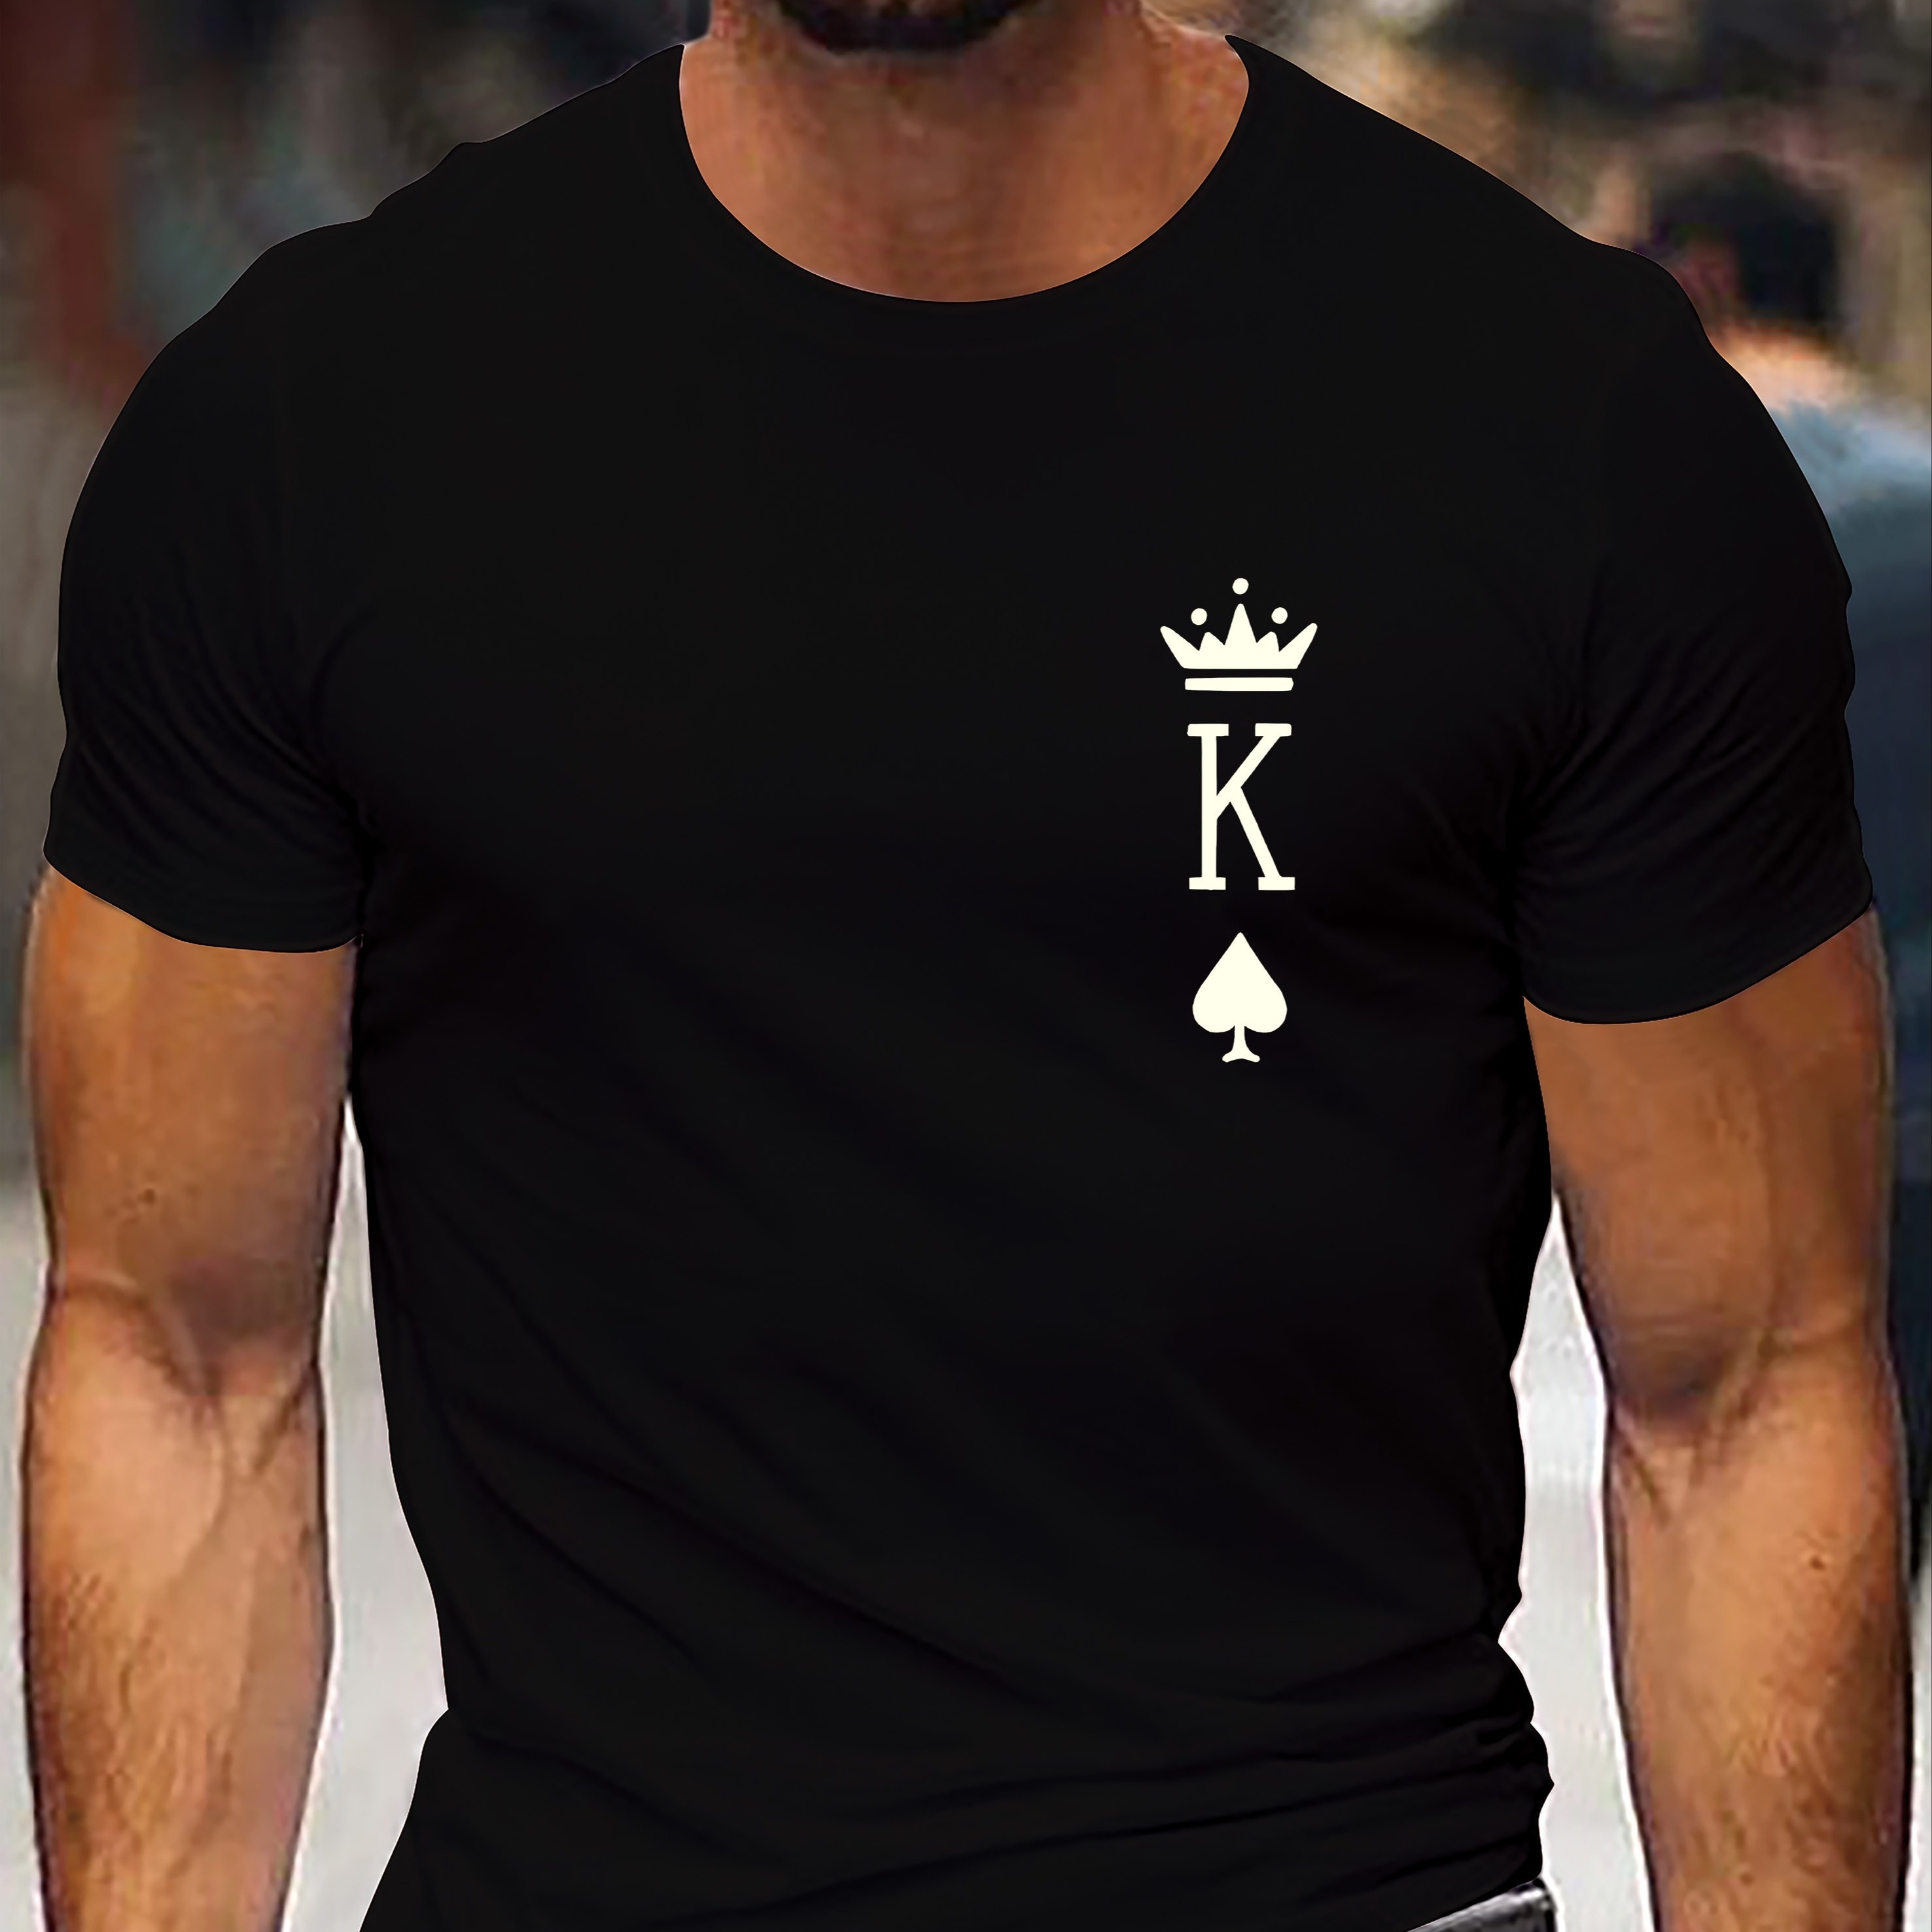 

King Of Spades Stylish Print Summer & Spring Tee For Men, Casual Short Sleeve Fashion Style T-shirt, Sporty New Arrival Novelty Top For Leisure